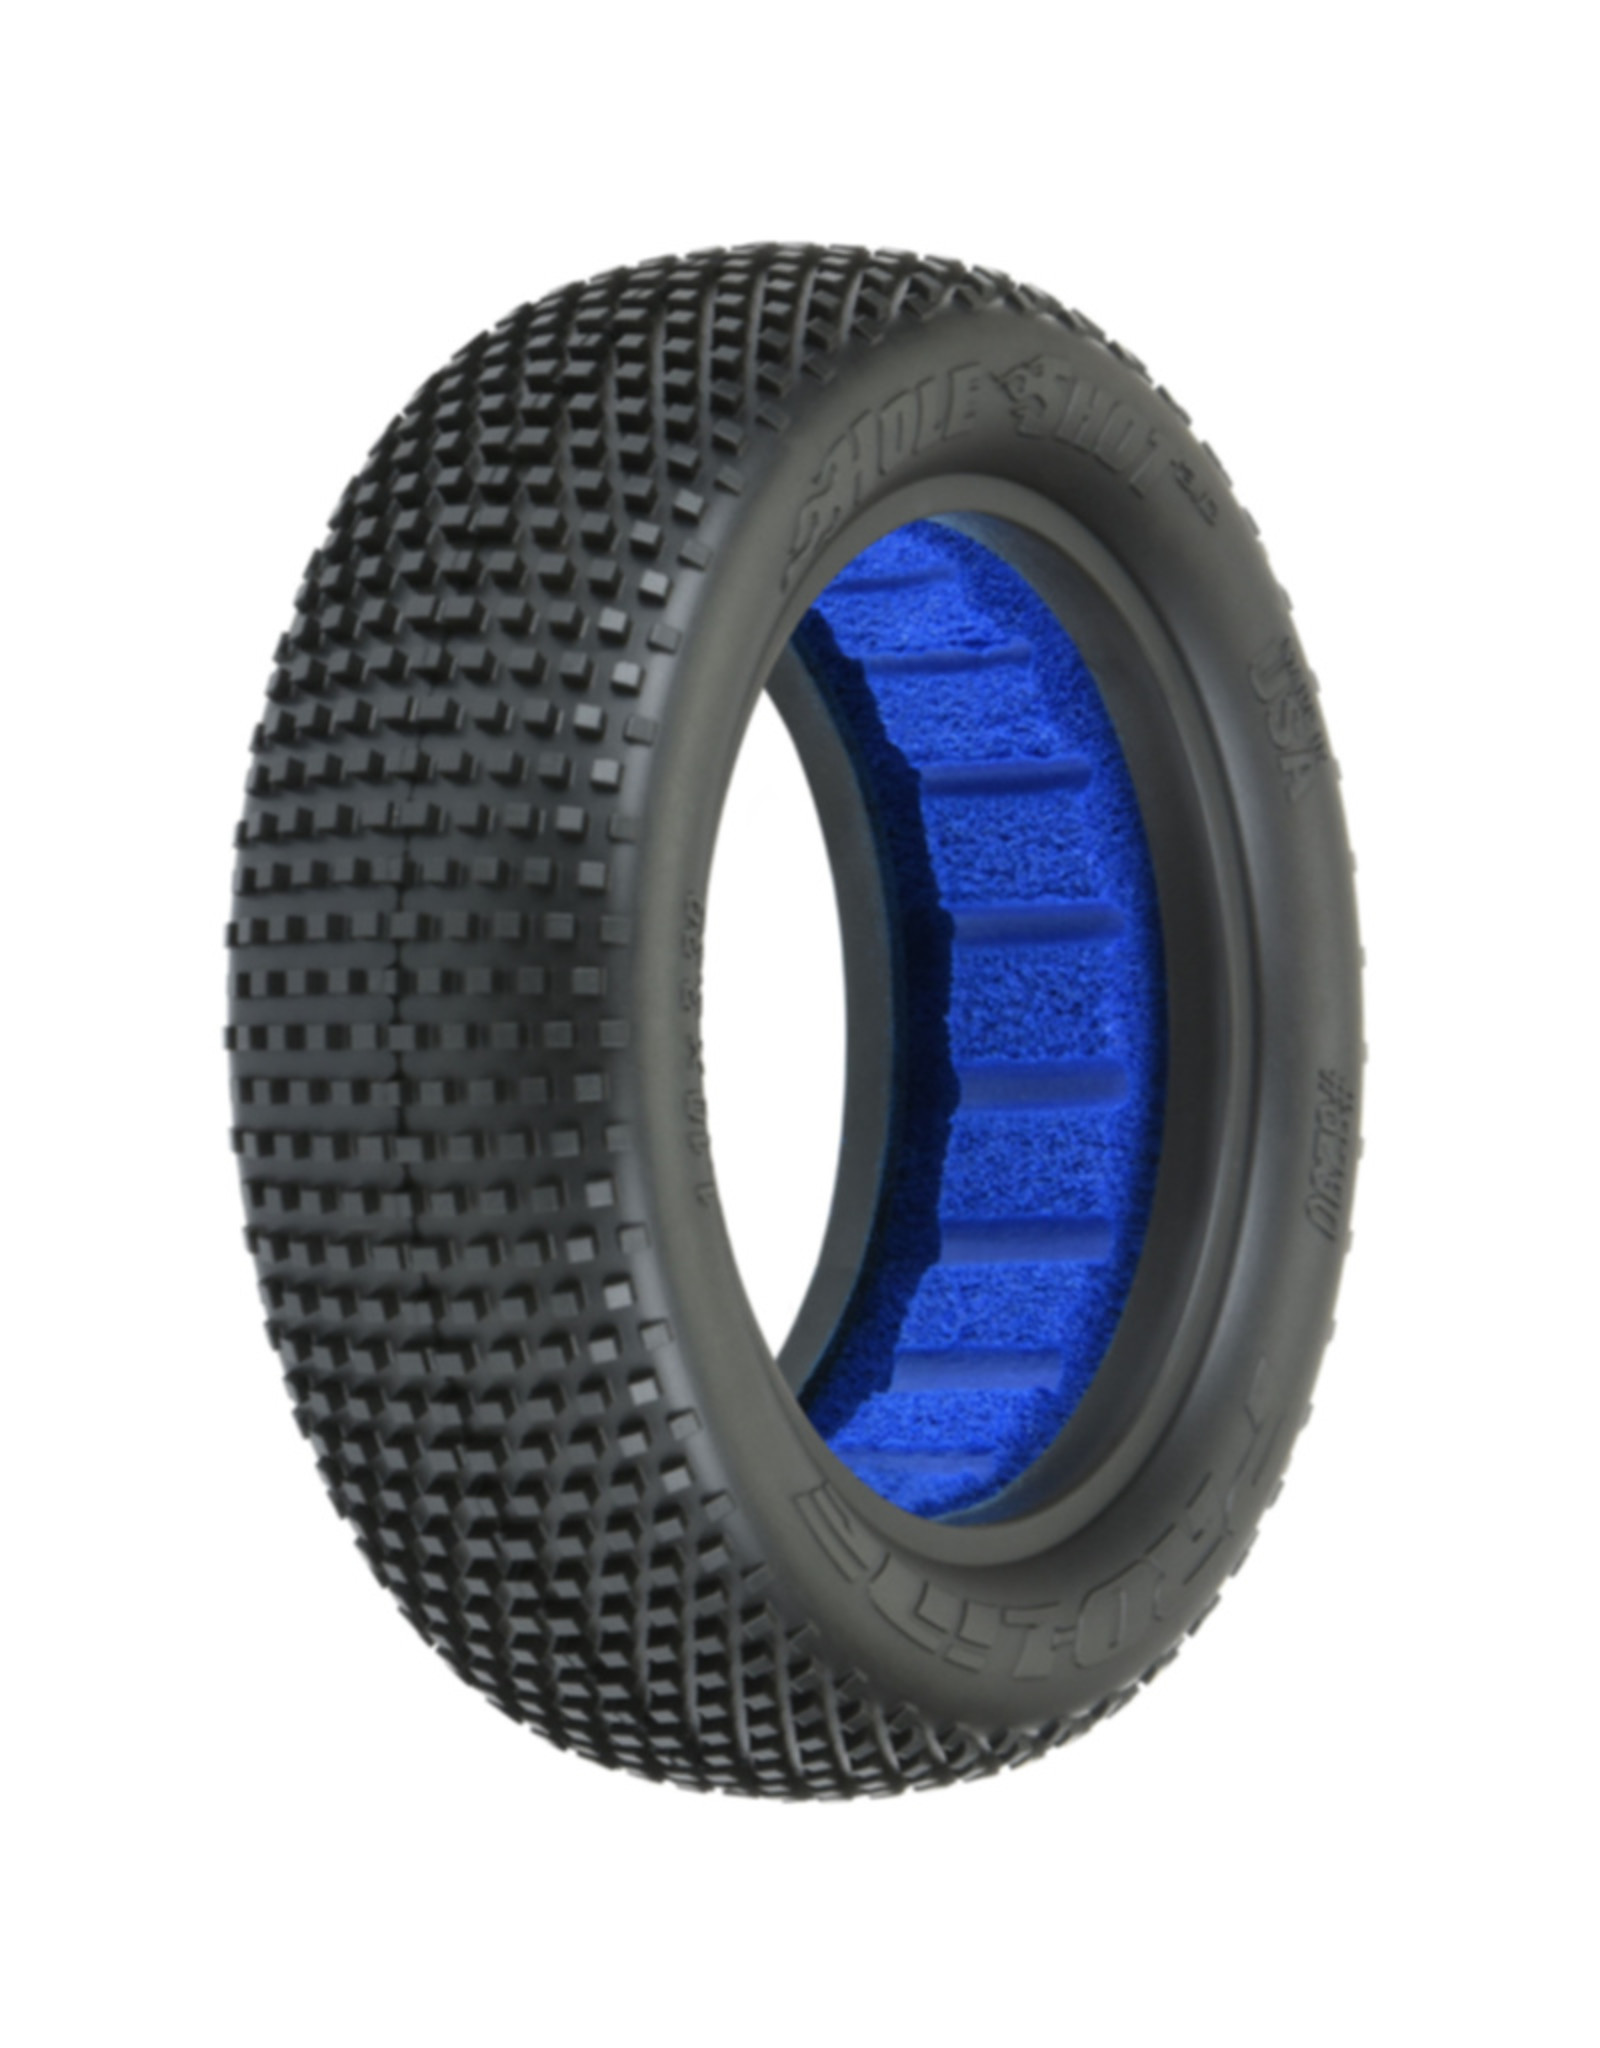 Pro-Line Racing PRO829003 Hole Shot 3.0 2.2" 2WD M4 Buggy Front Tires